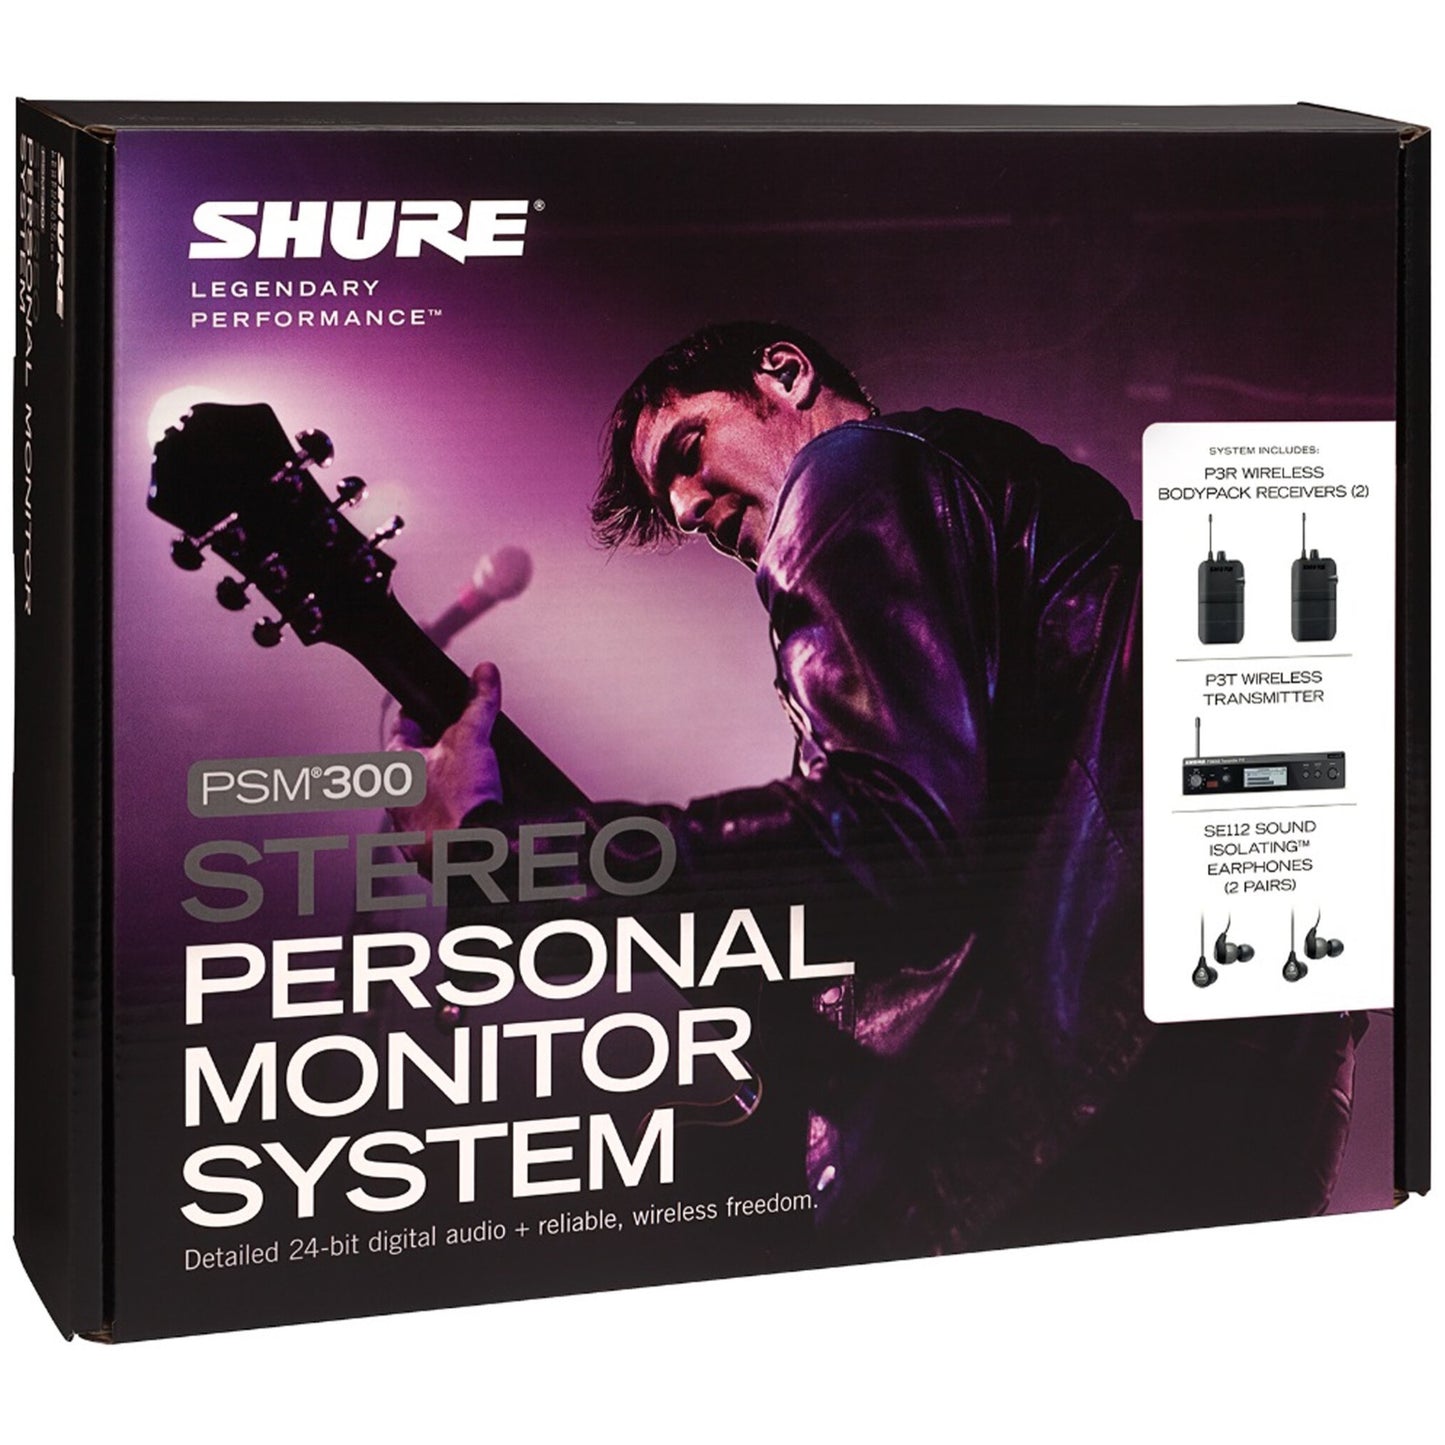 Shure PSM 300 Twin Pack IEM Wireless In-Ear Monitor System with SE112 Earphones, Band G20 (488.150 - 511.850 MHz)